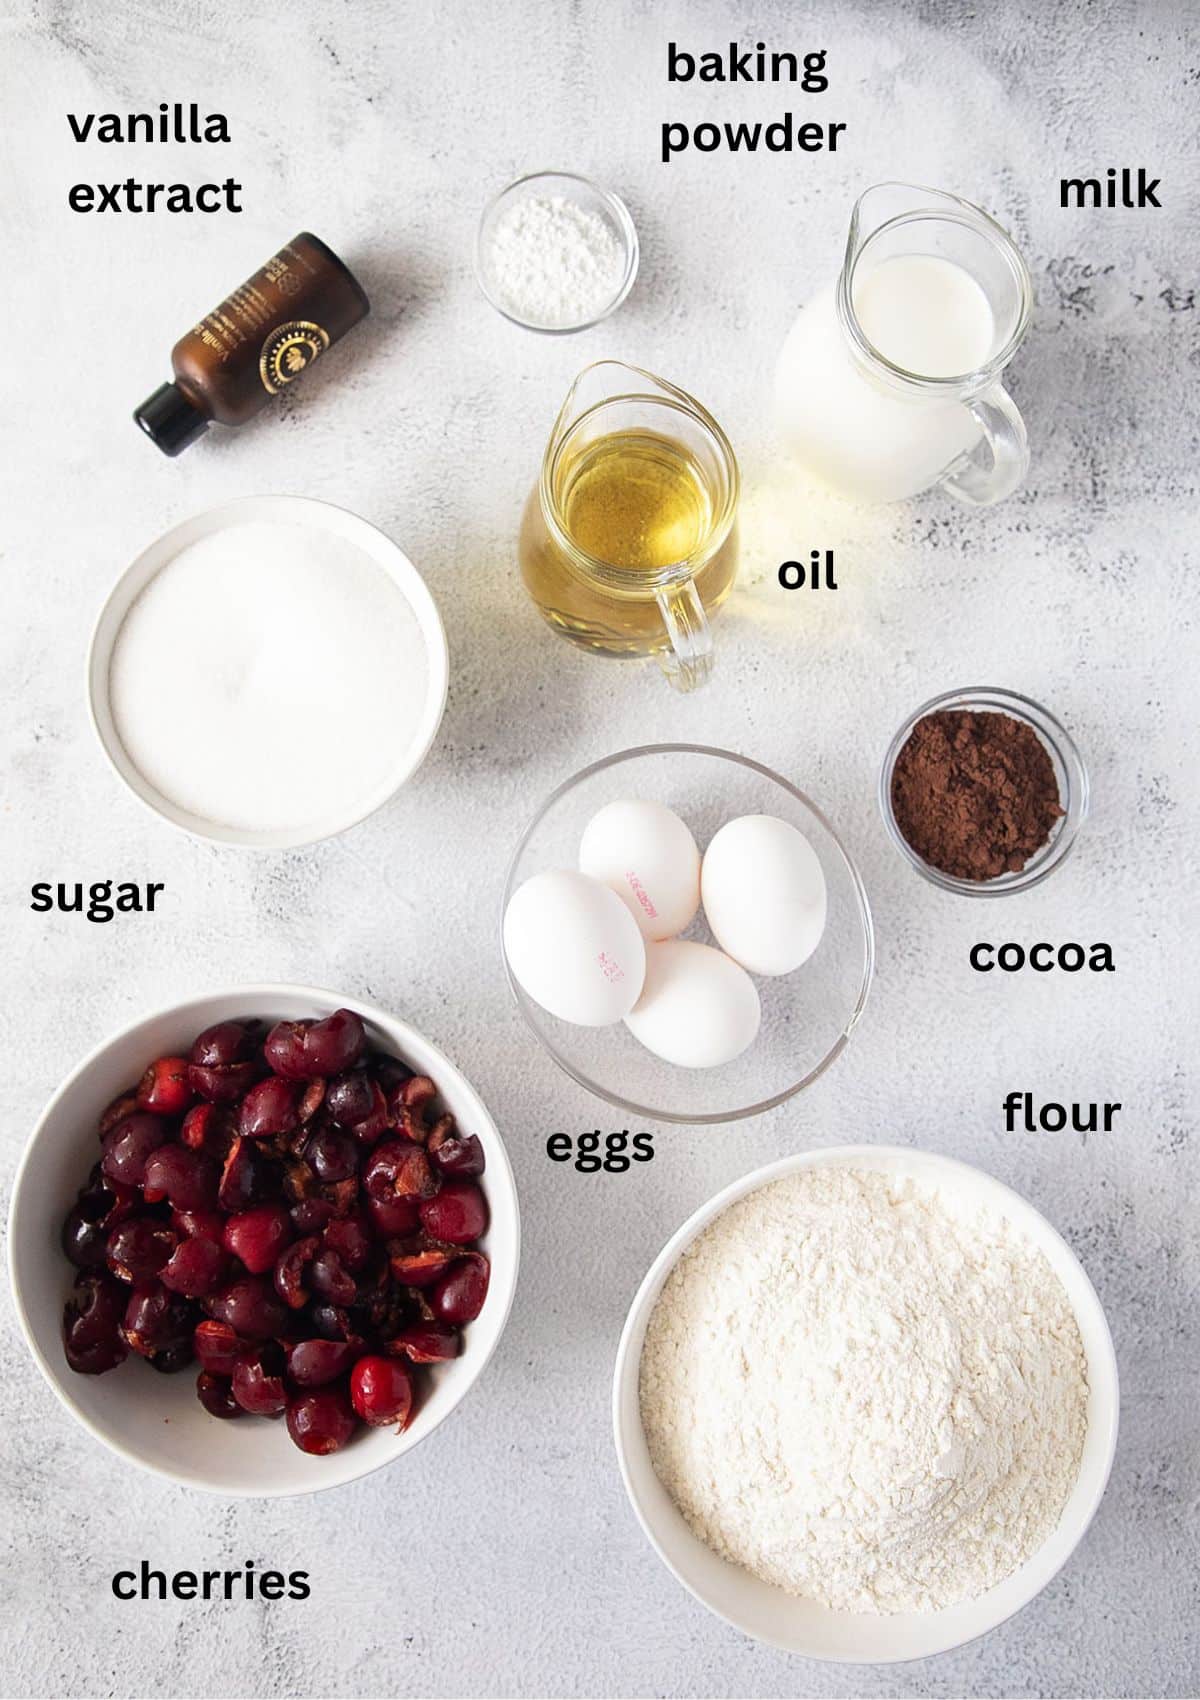 listed ingredients for making bundt cake with cherries, oil, eggs, flour, sugar and milk.